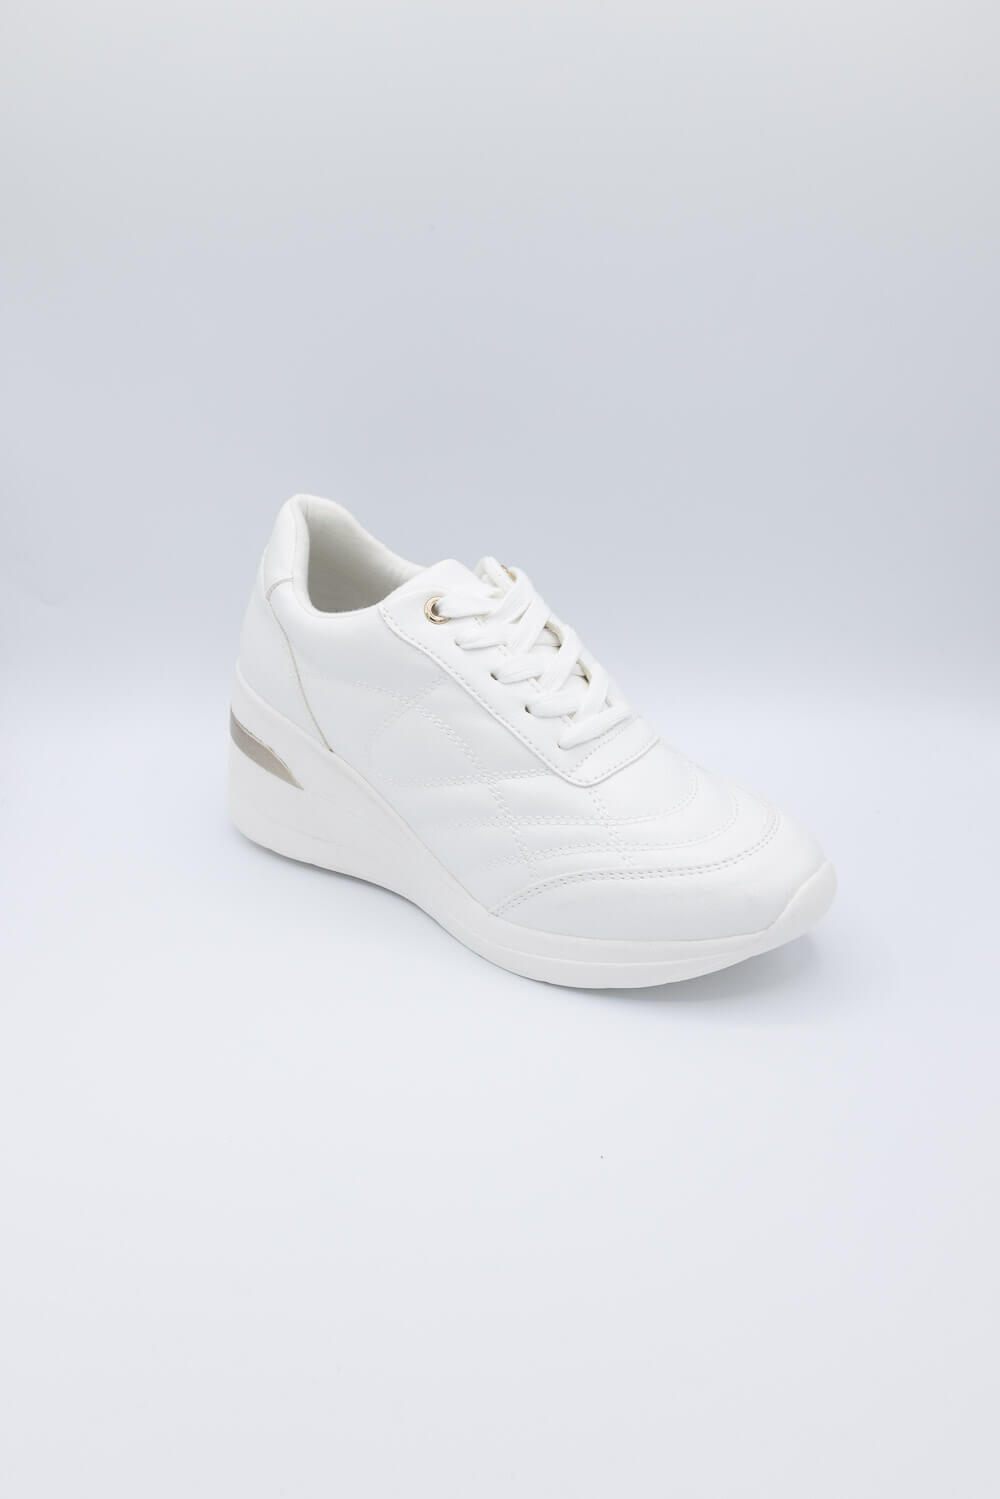 Soda Shoes Annie Wedged Sneakers for Women in White | ANNIE-G WHITE – Glik's